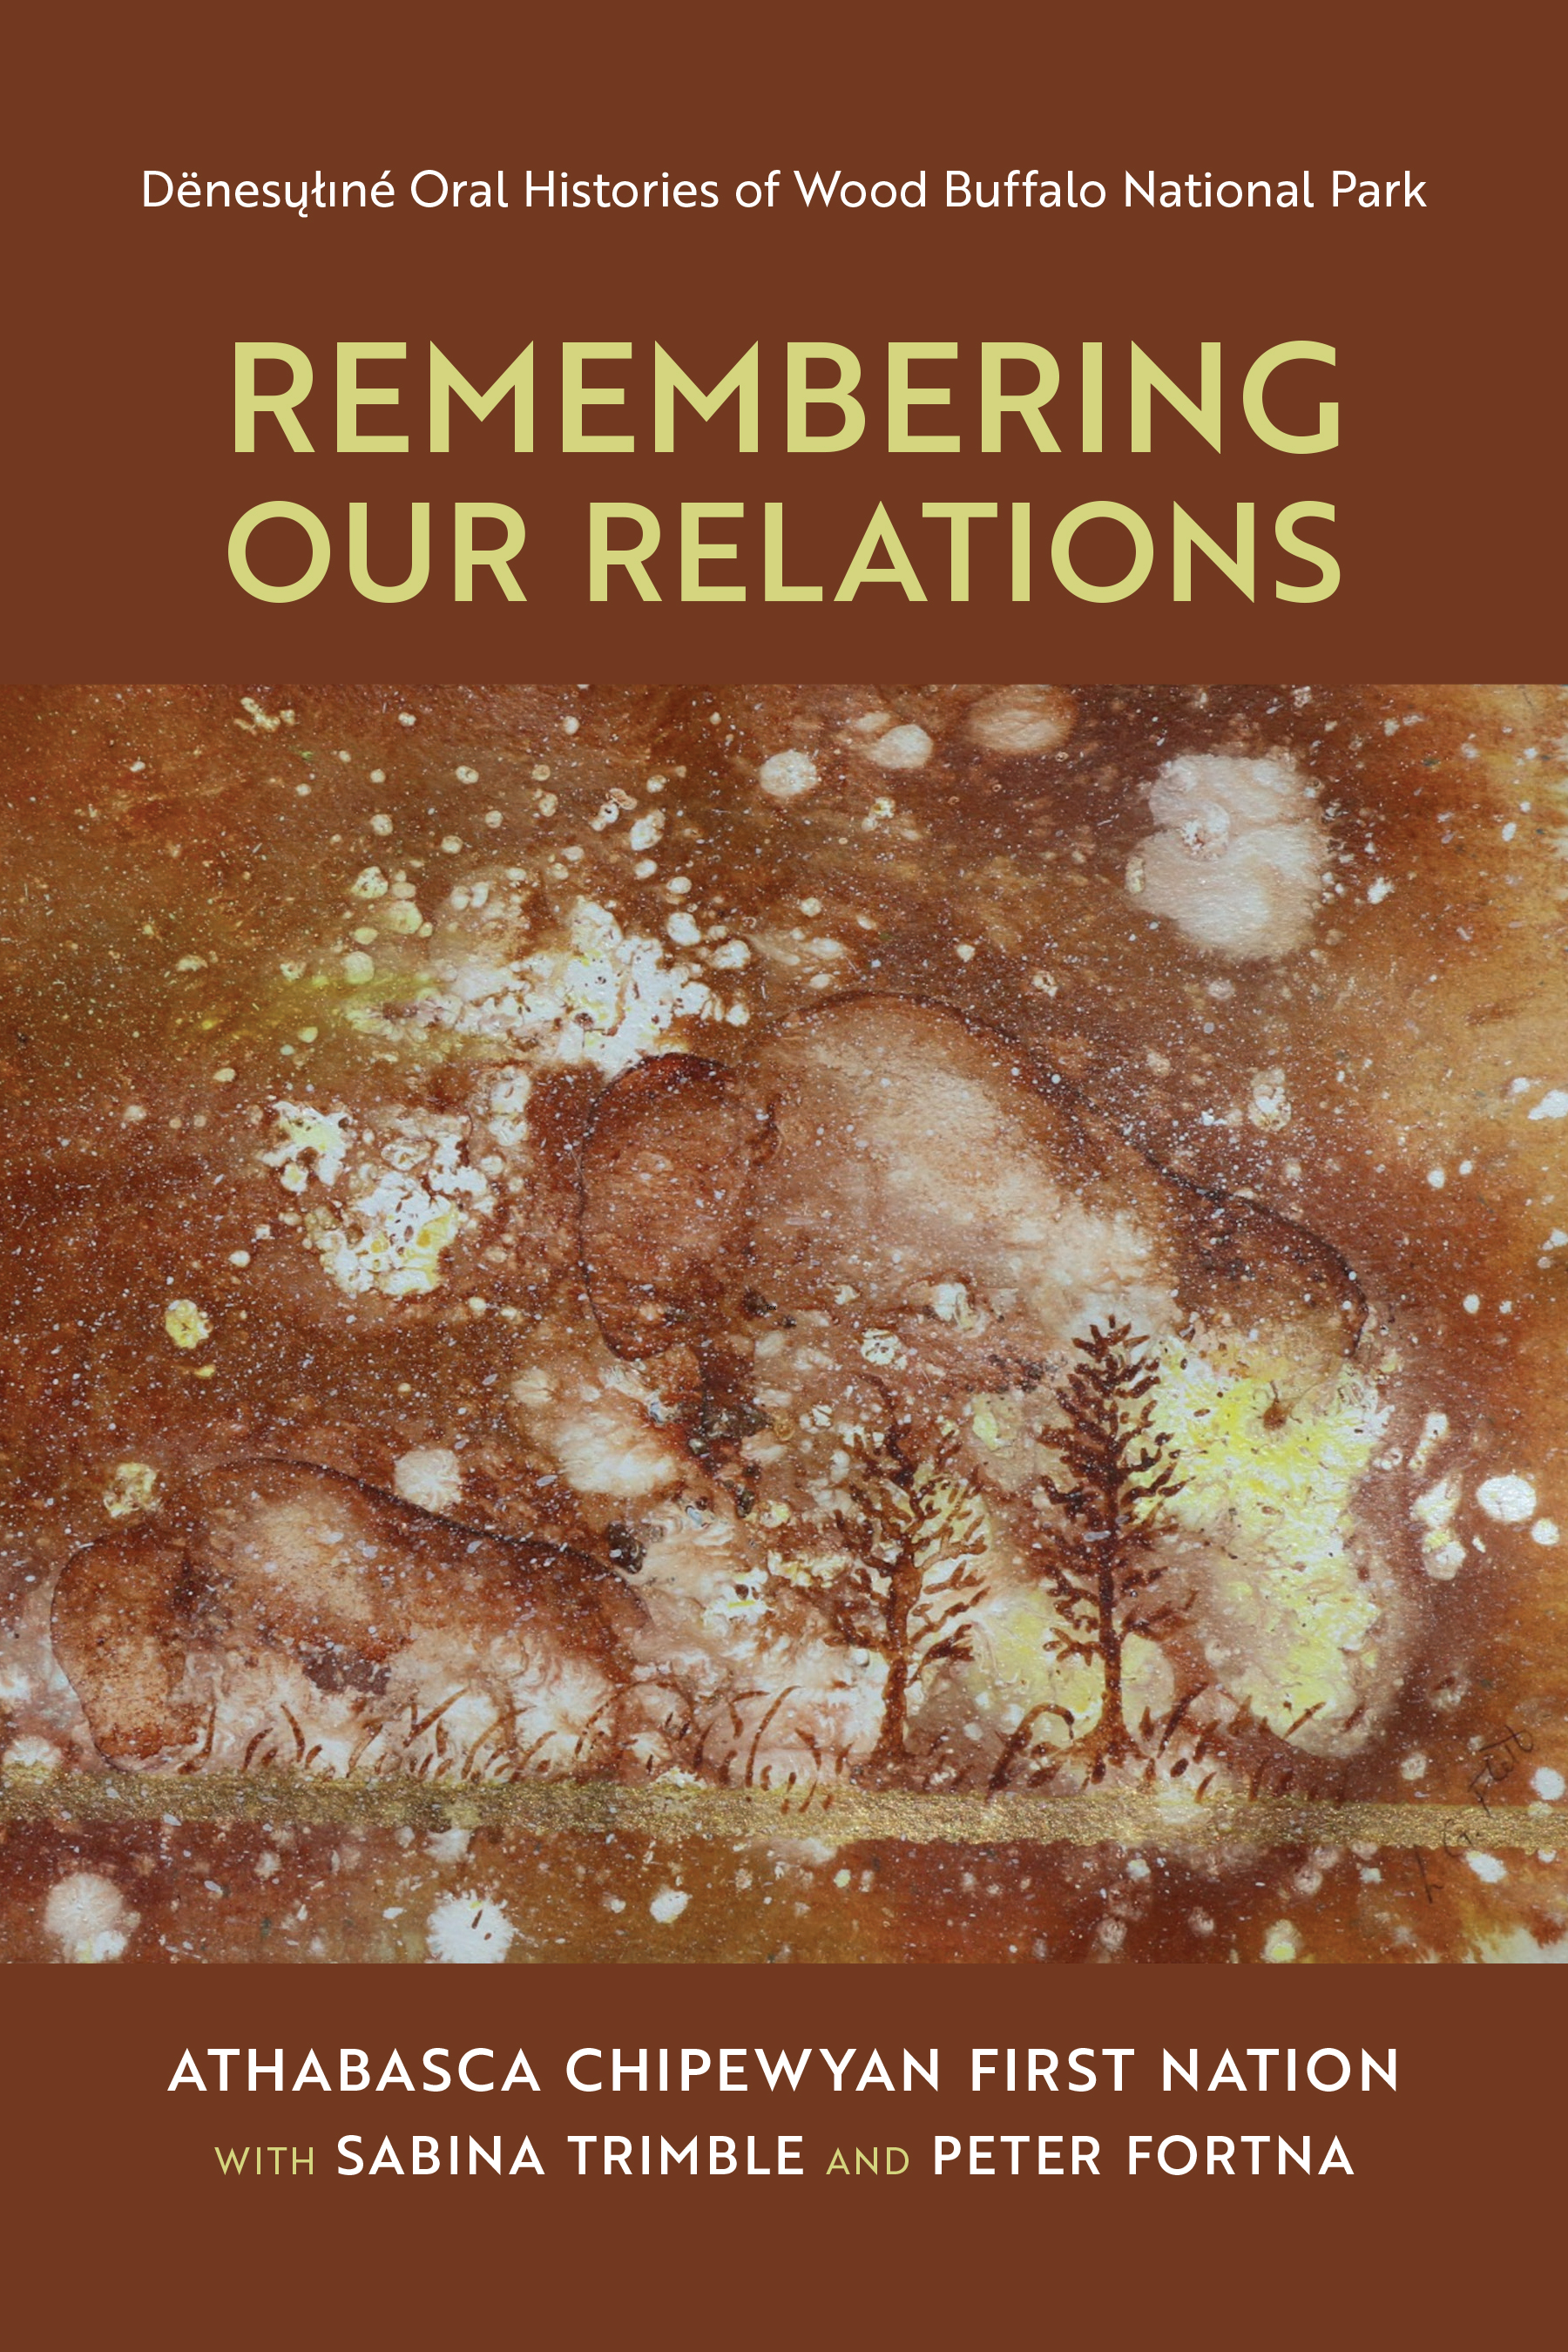 Cover Image for: Remembering Our Relations